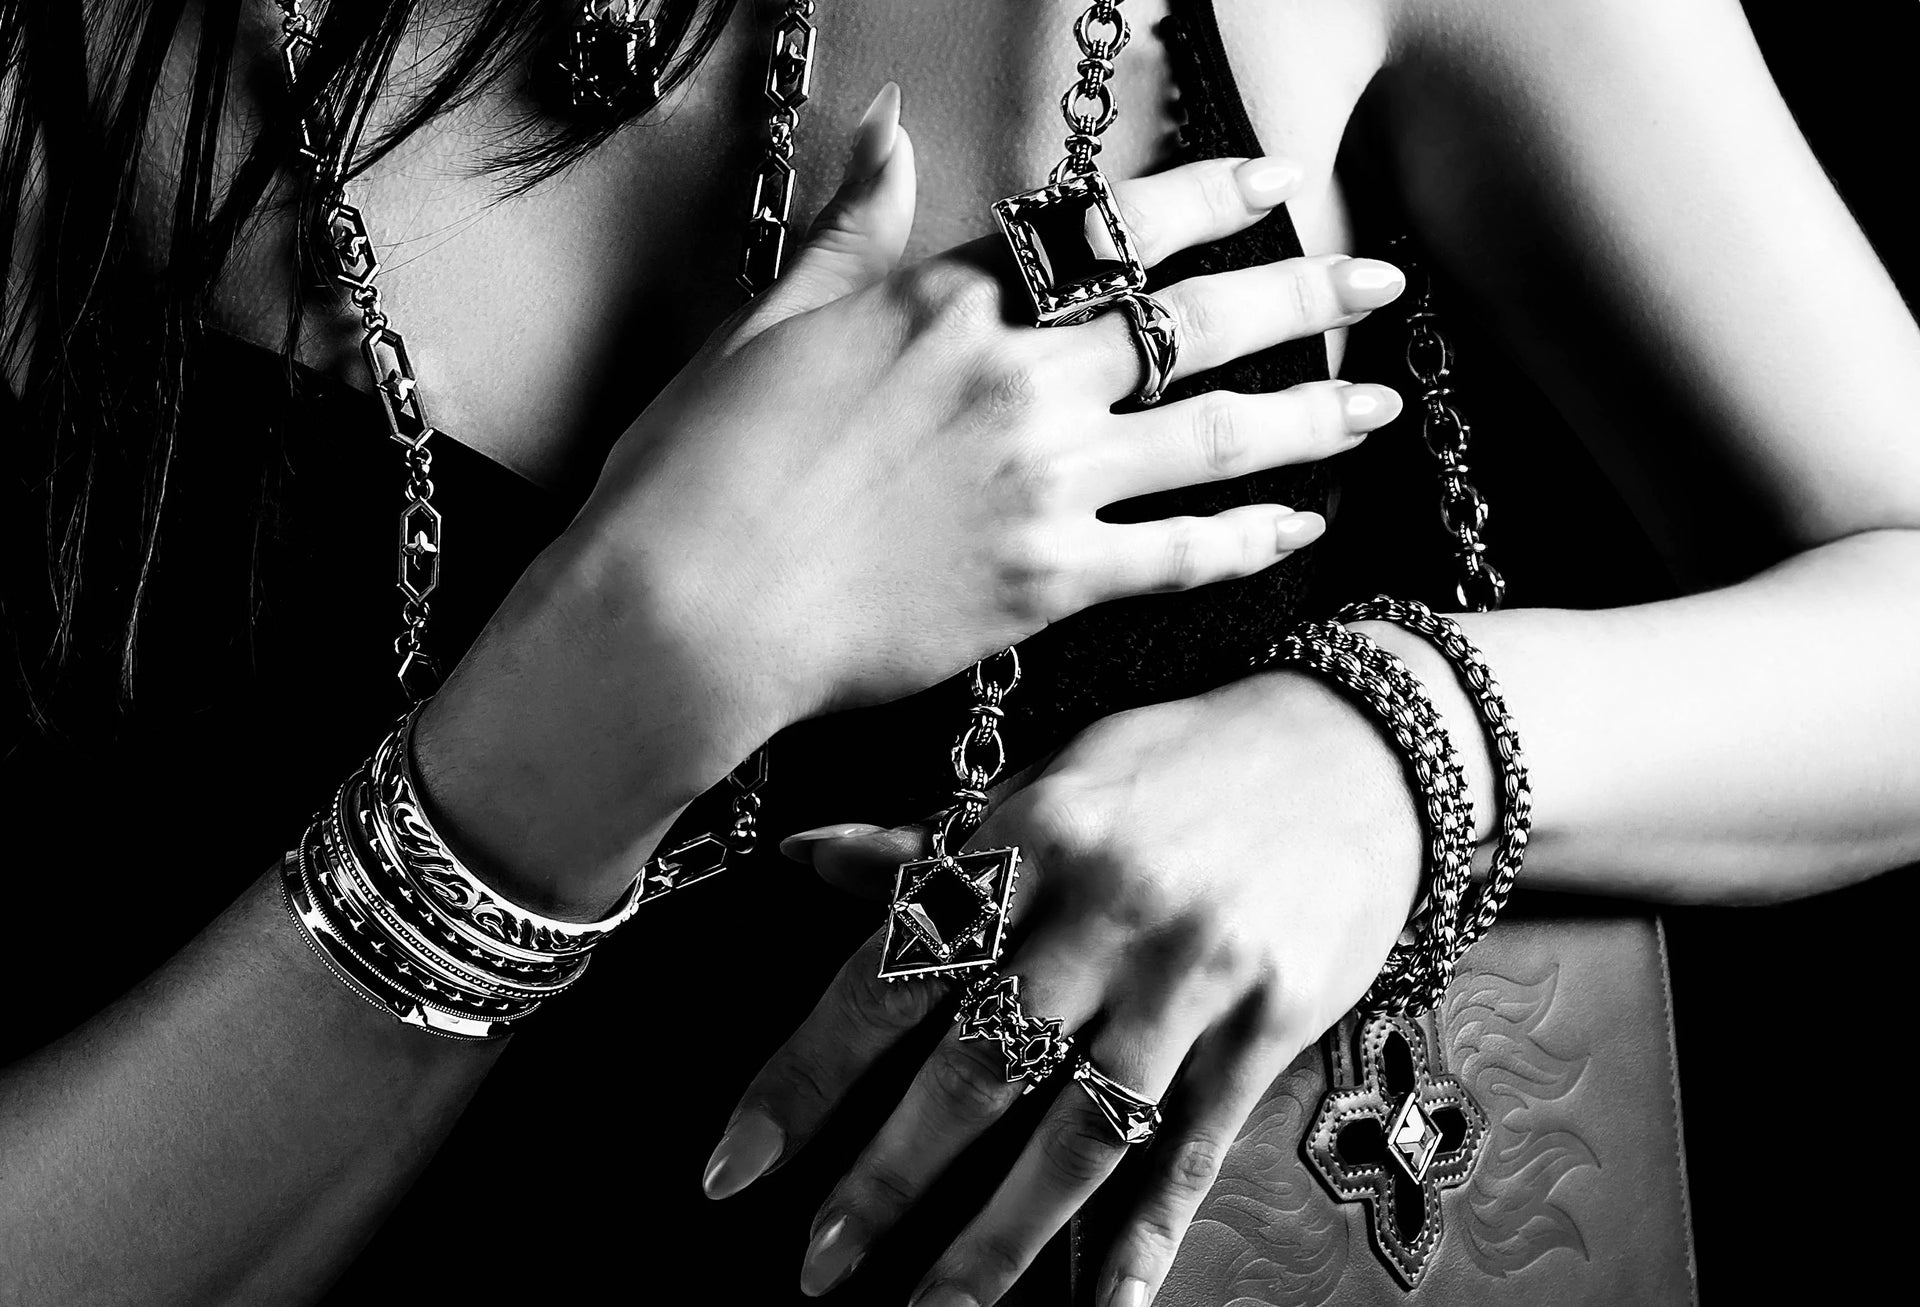 Black and white close up shot of a woman's torso and arms decorated in jewelry